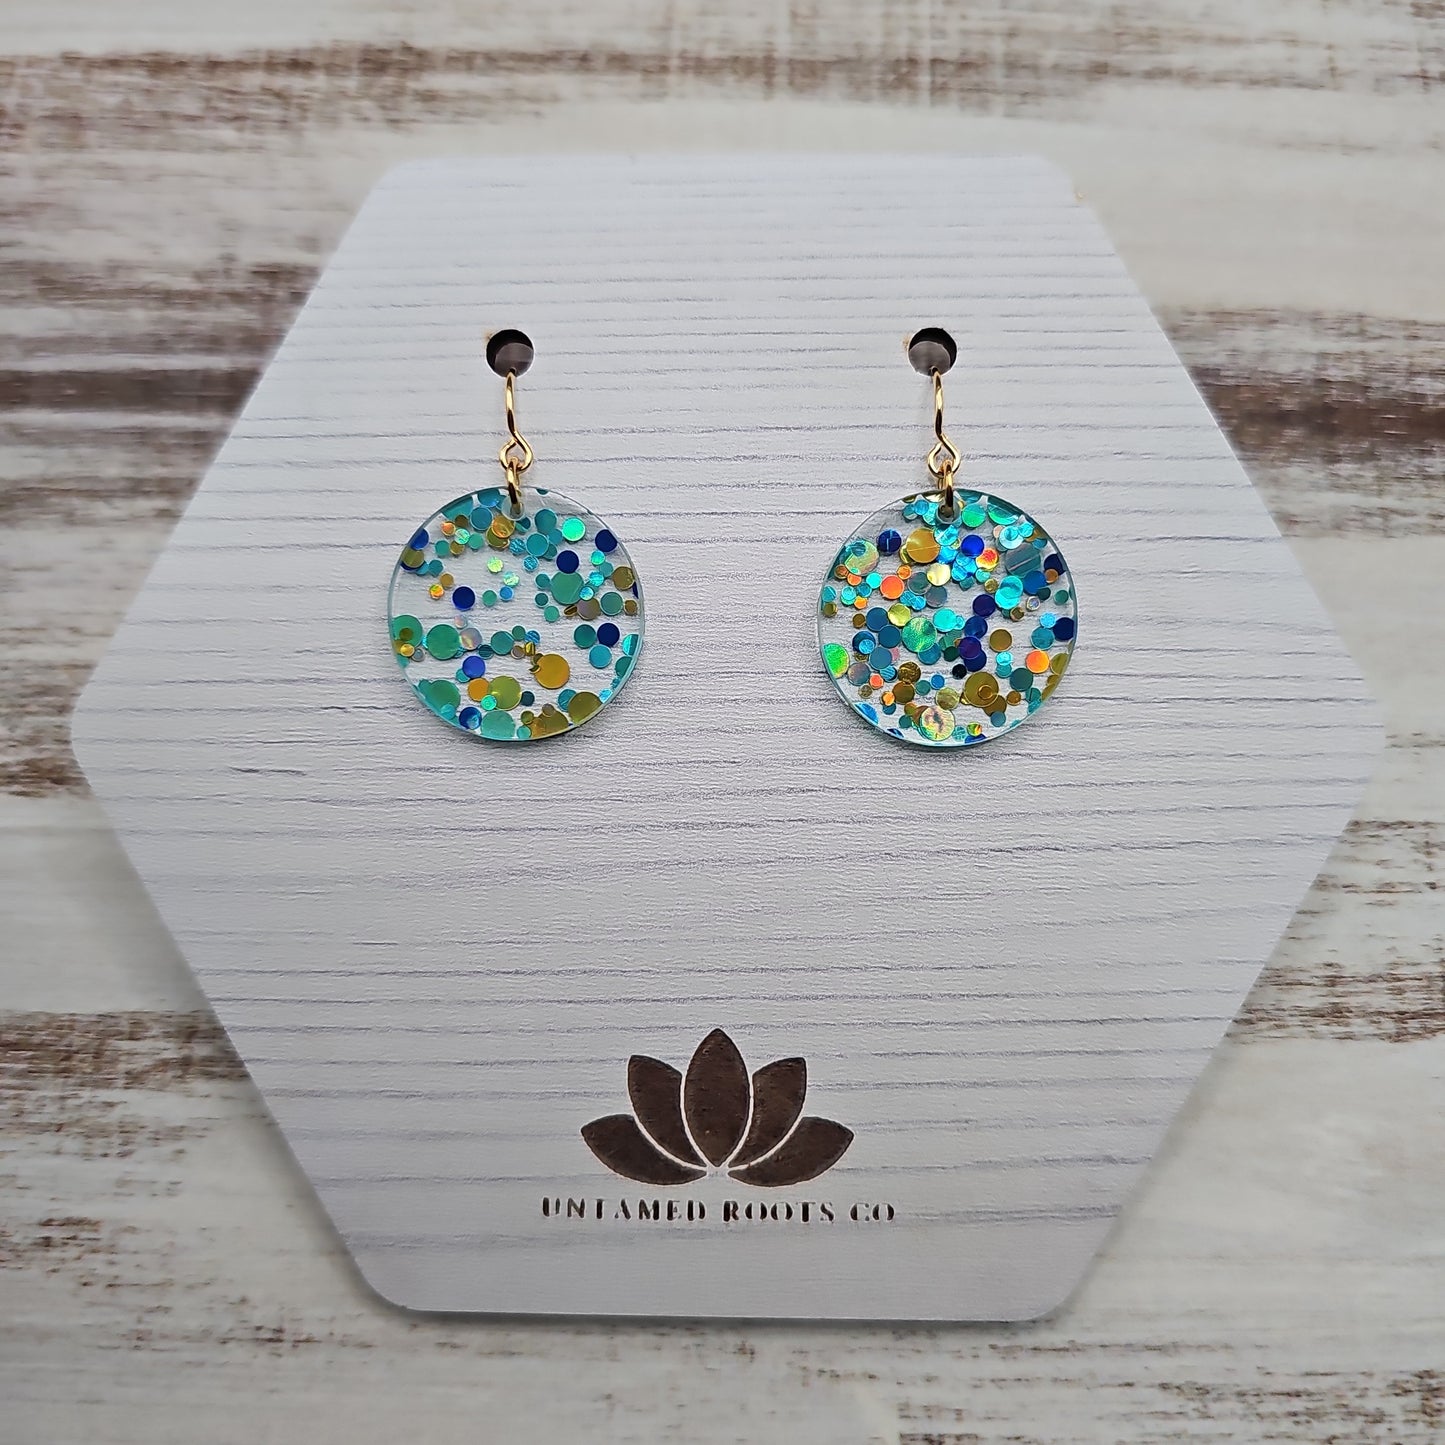 Teal and Gold Polka Dot Earrings (8 styles)